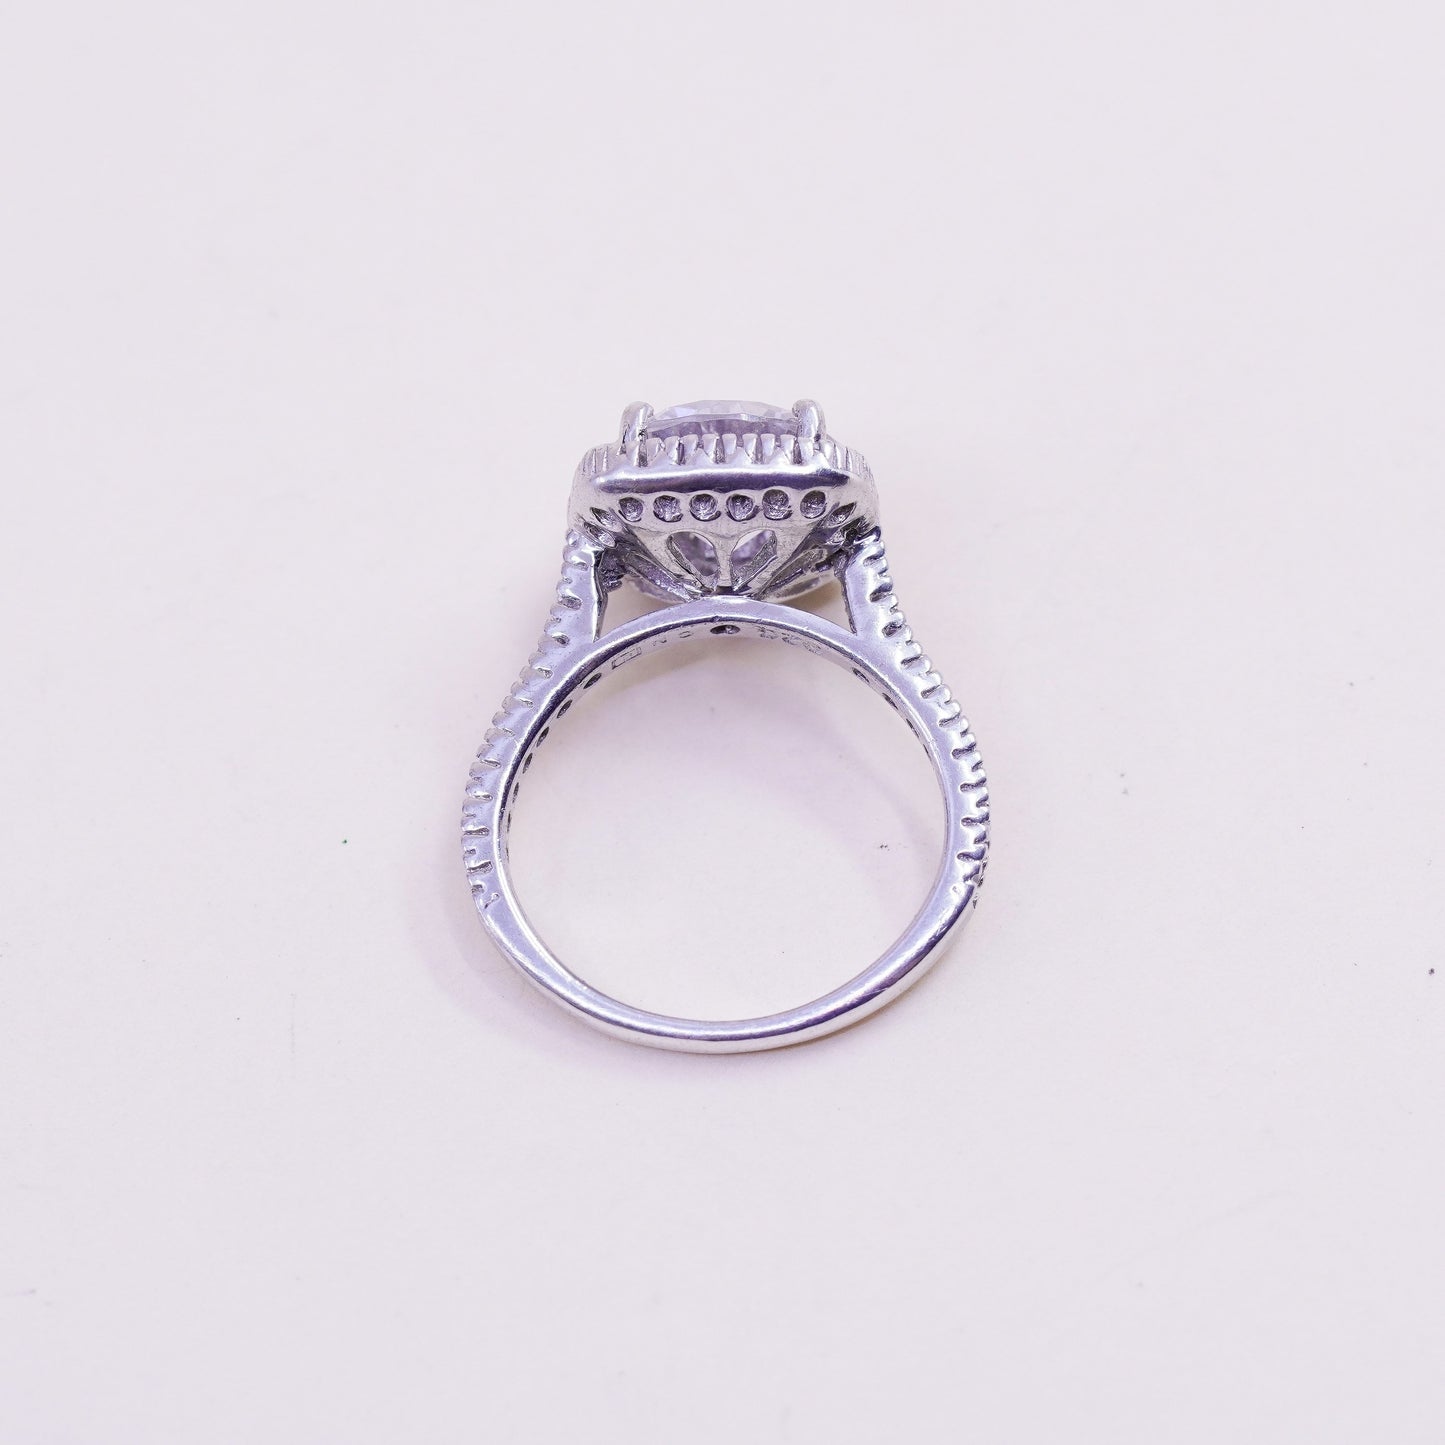 Size 5, Vintage sterling silver handmade ring, engagement ring with square cz